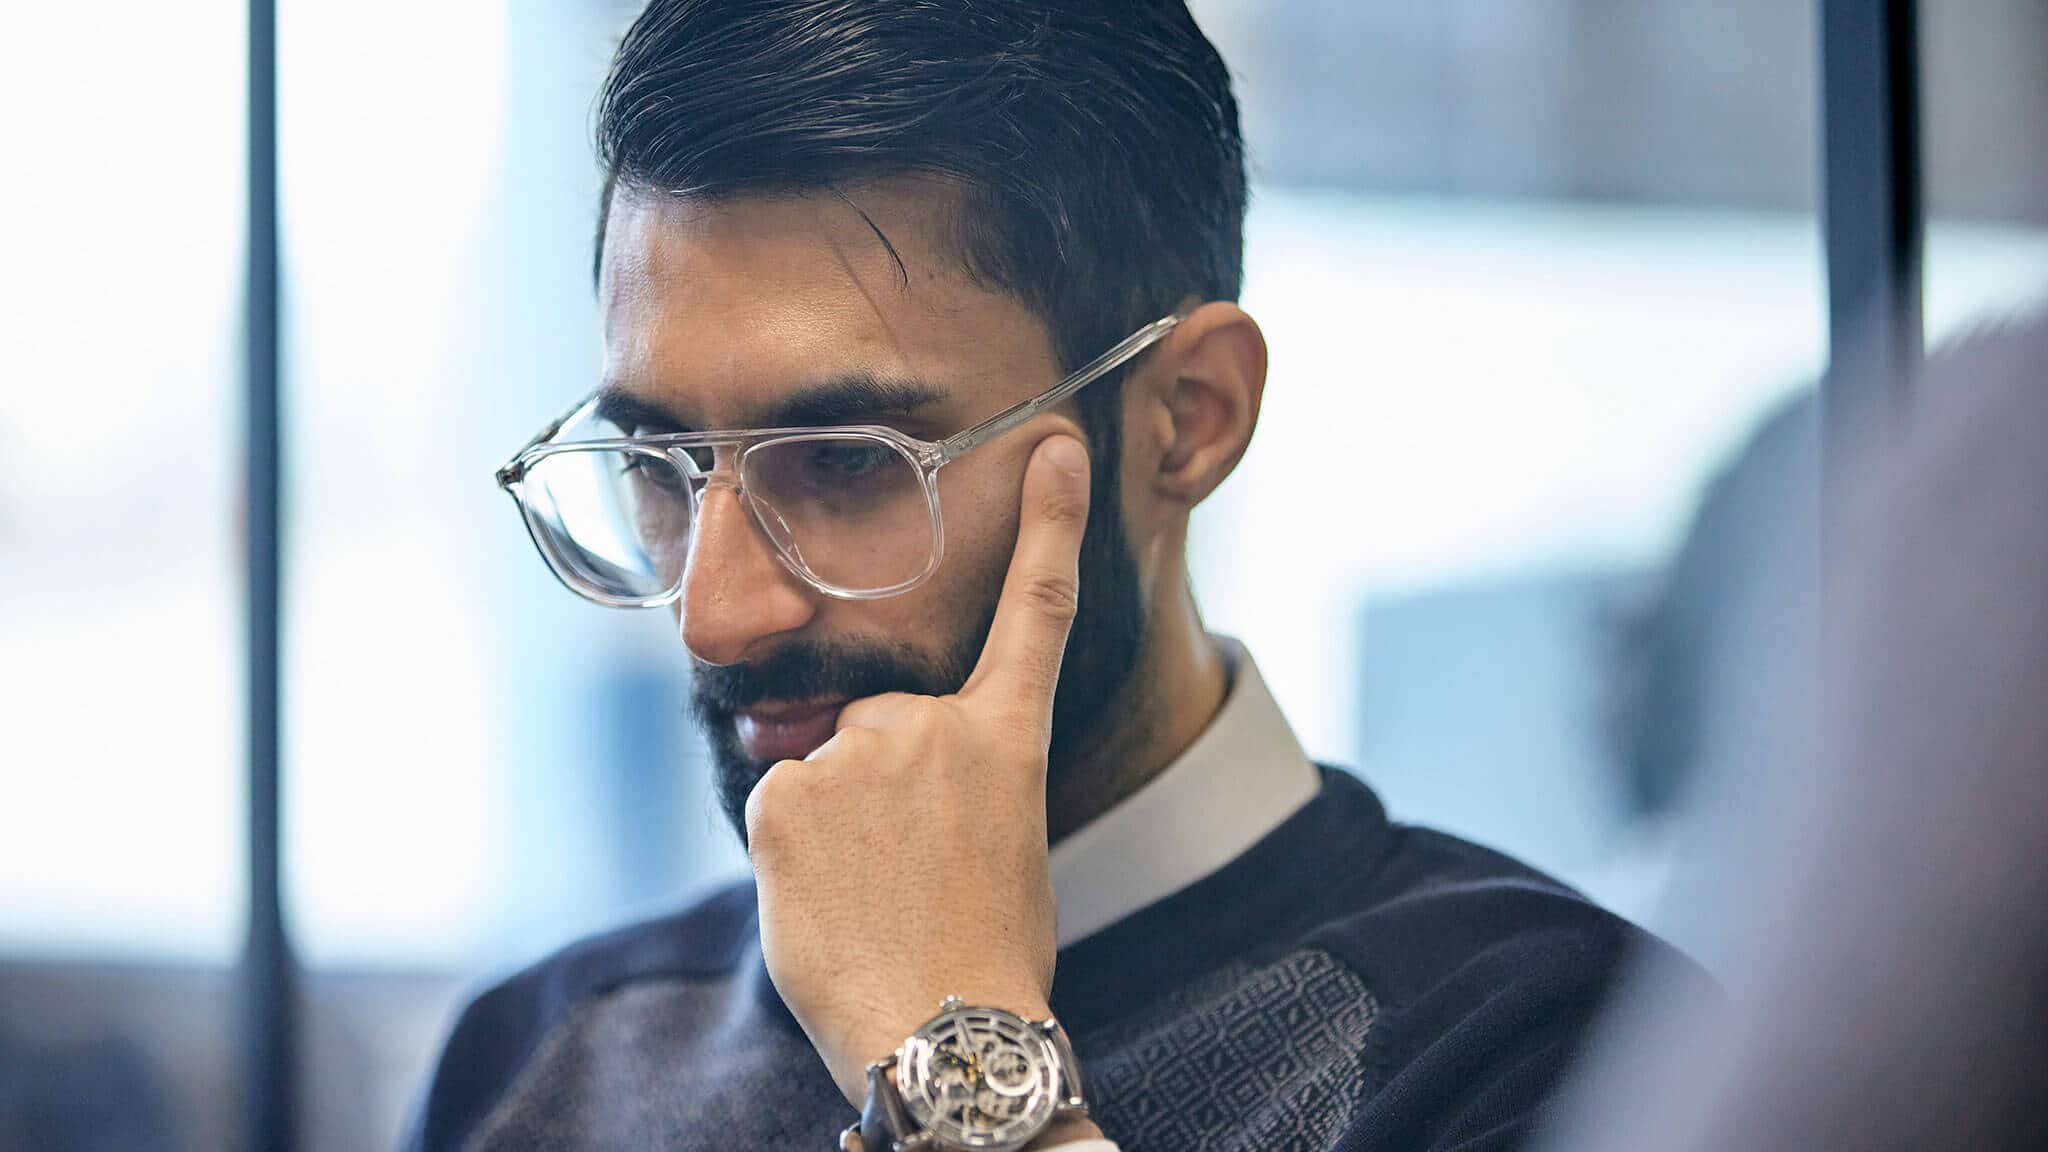 Man with dark hair, beard and glasses cradling face in concentration